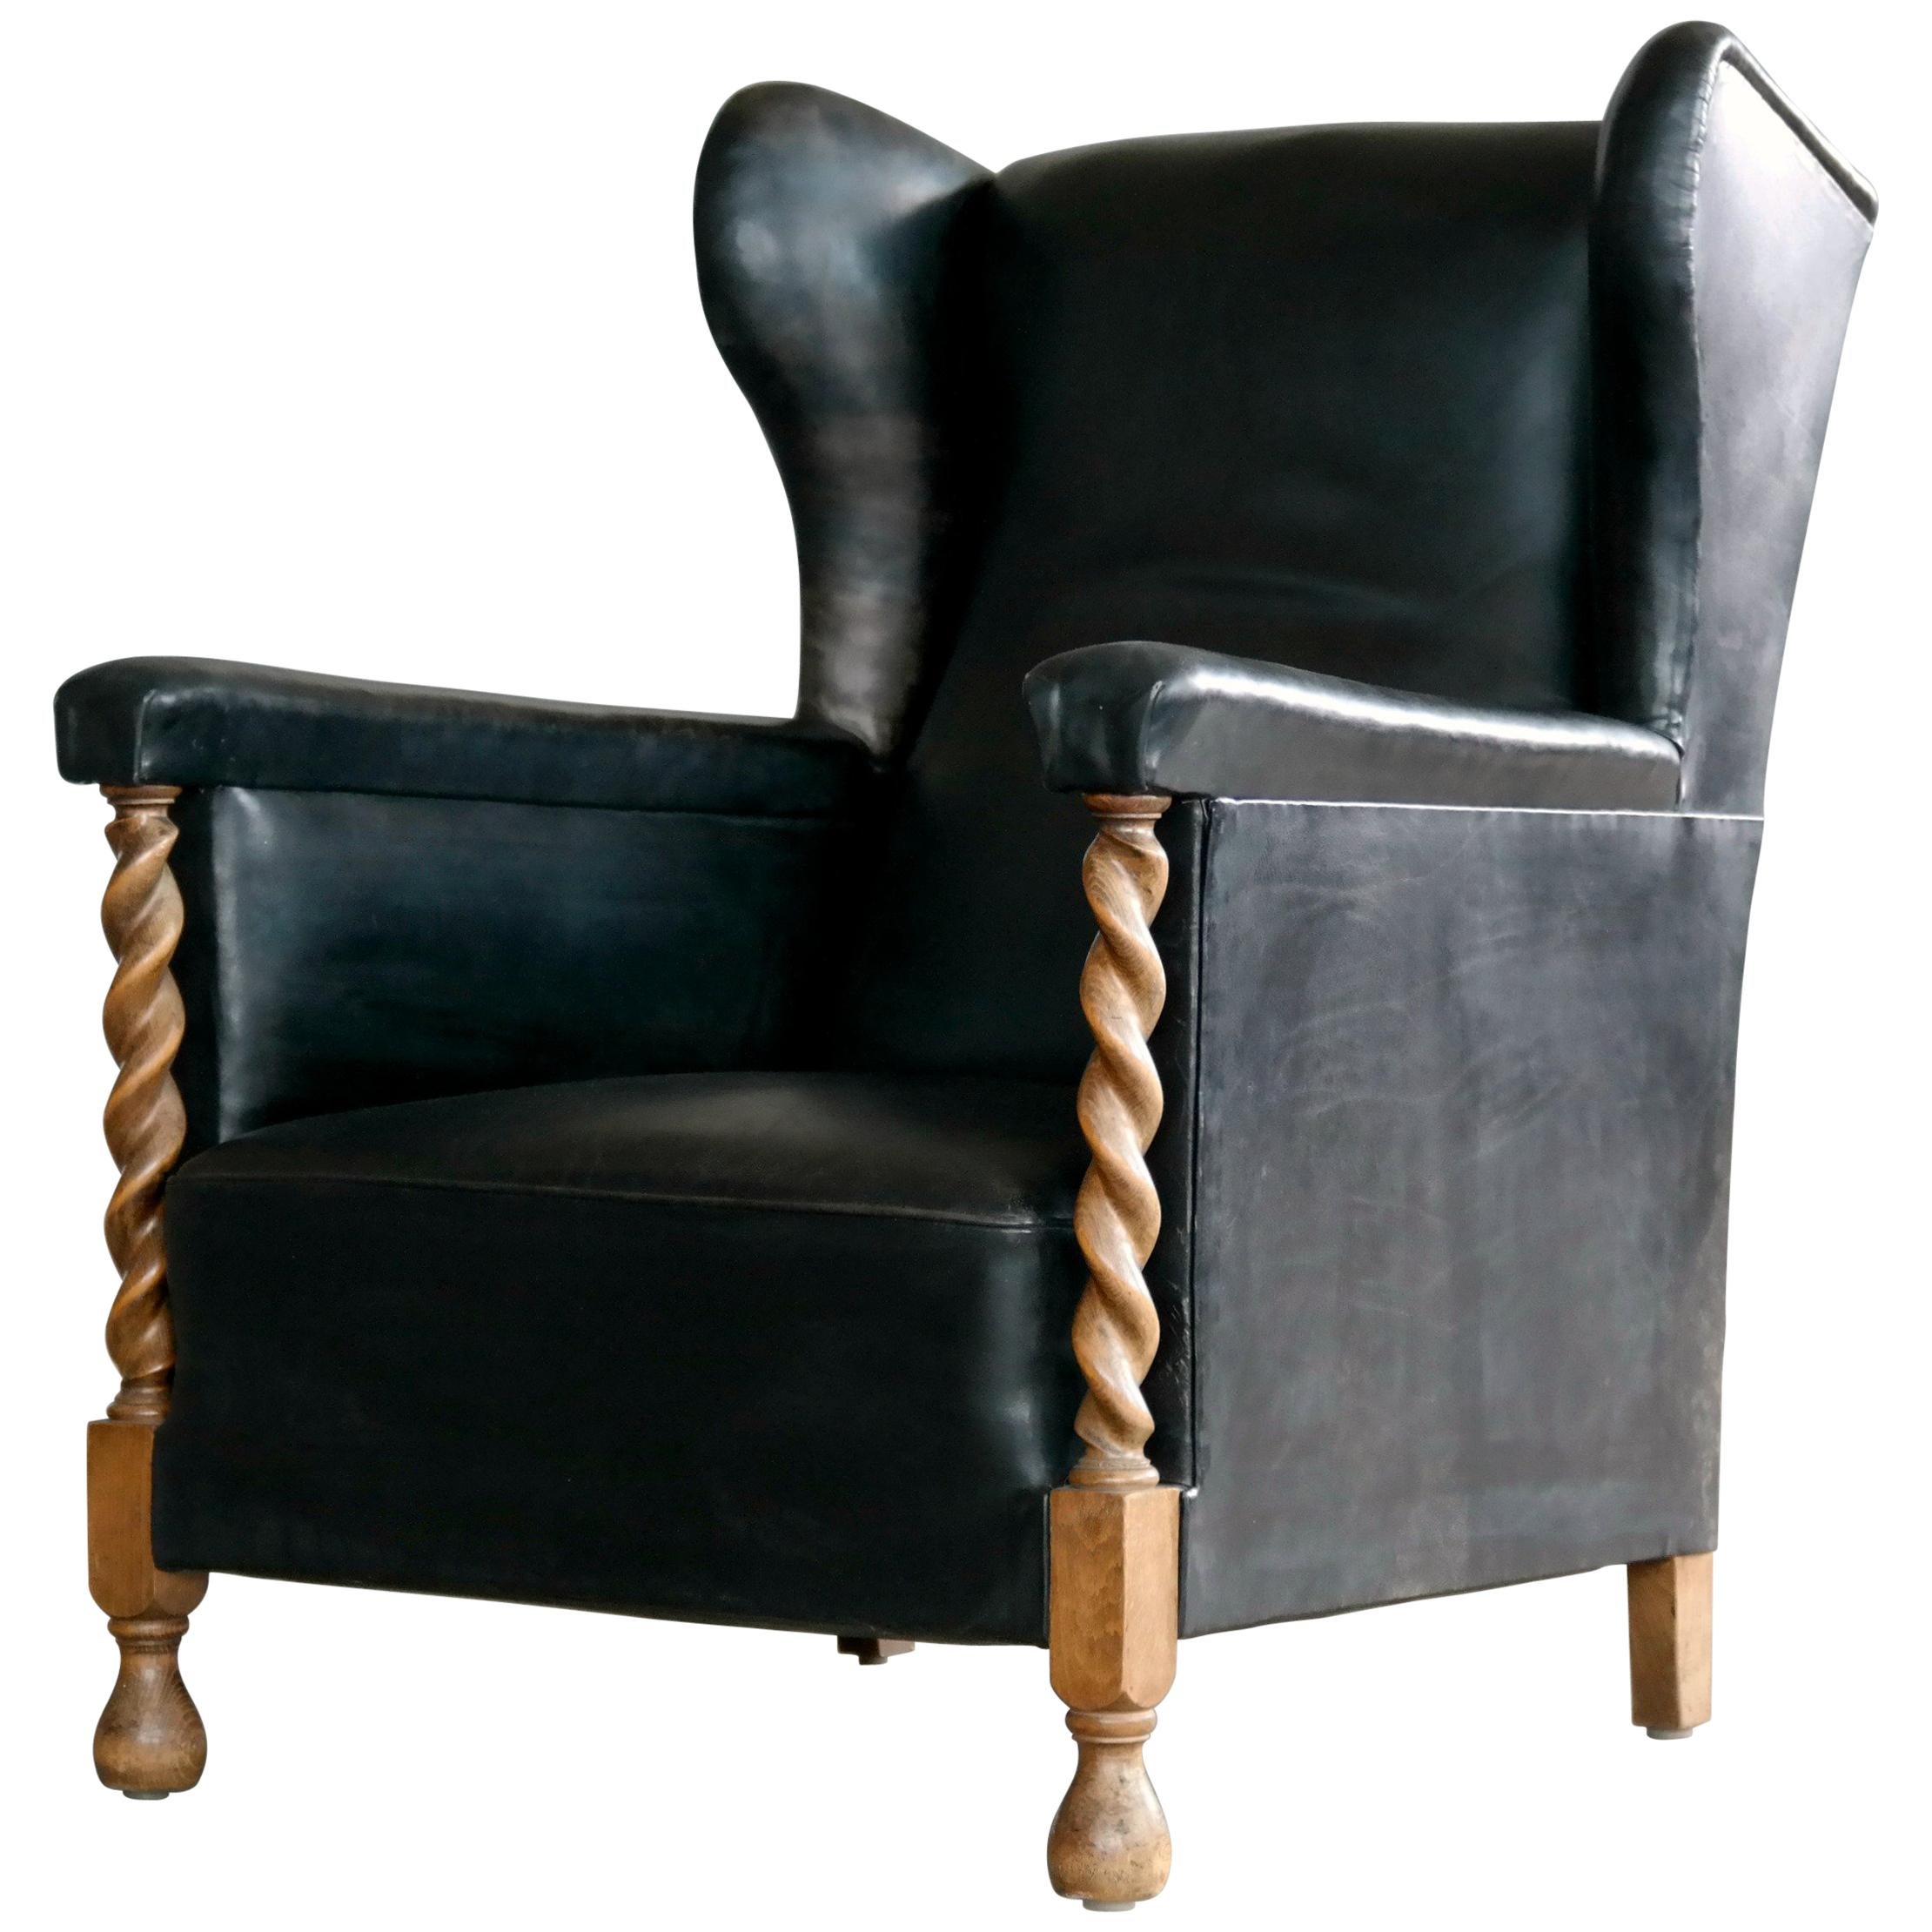 Danish 1930s Large Scale Club or Wingback Chair in Black Leather and Carved Oak